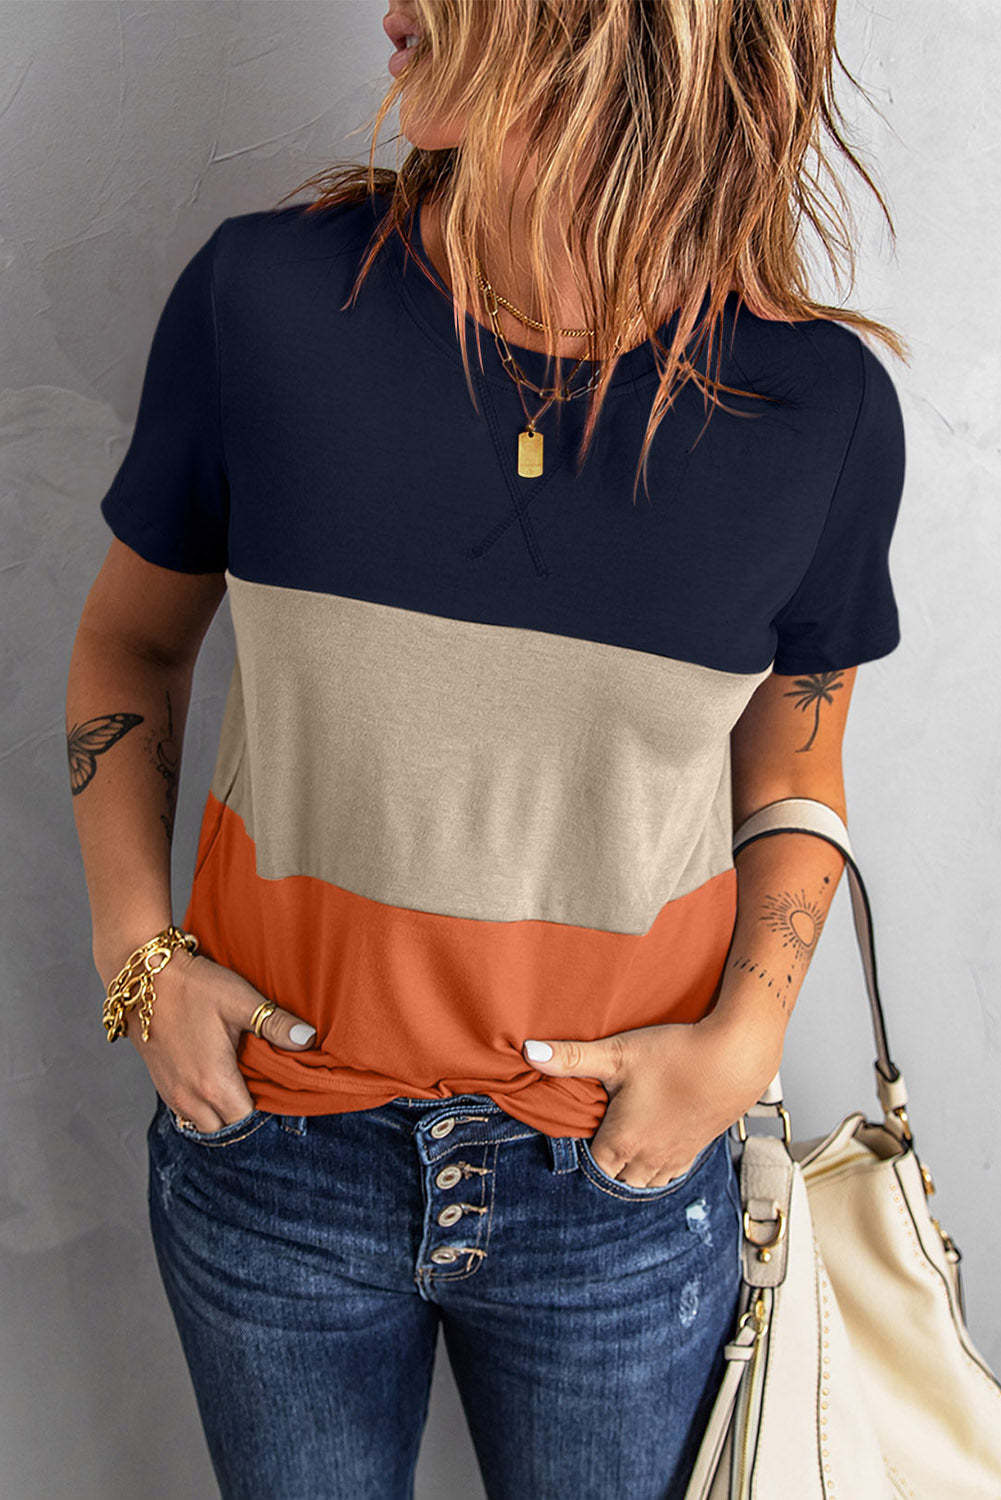 Women's Color Matching Short-sleeved T-shirt Loose Tops